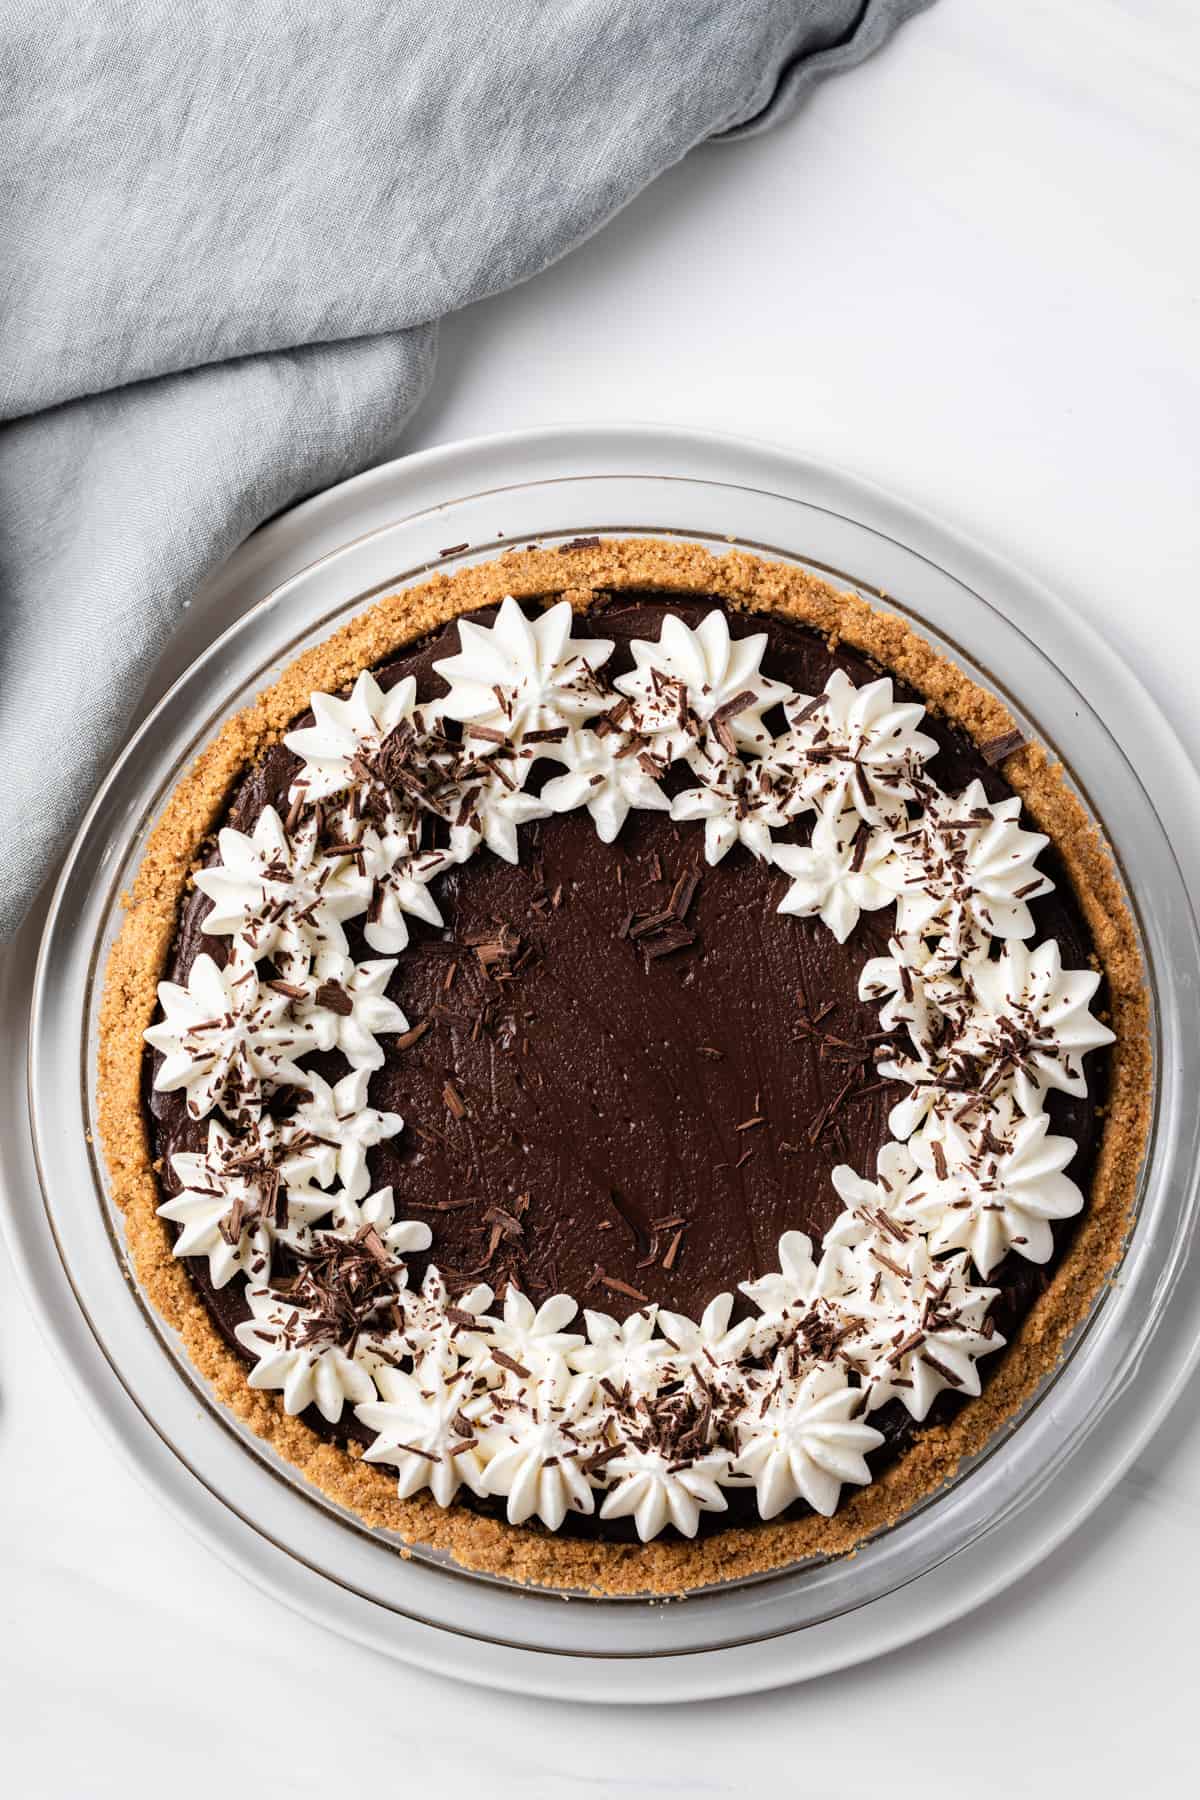 overhead view of chocolate pie topped with whipped cream and chocolate shavings in a glass pie plate